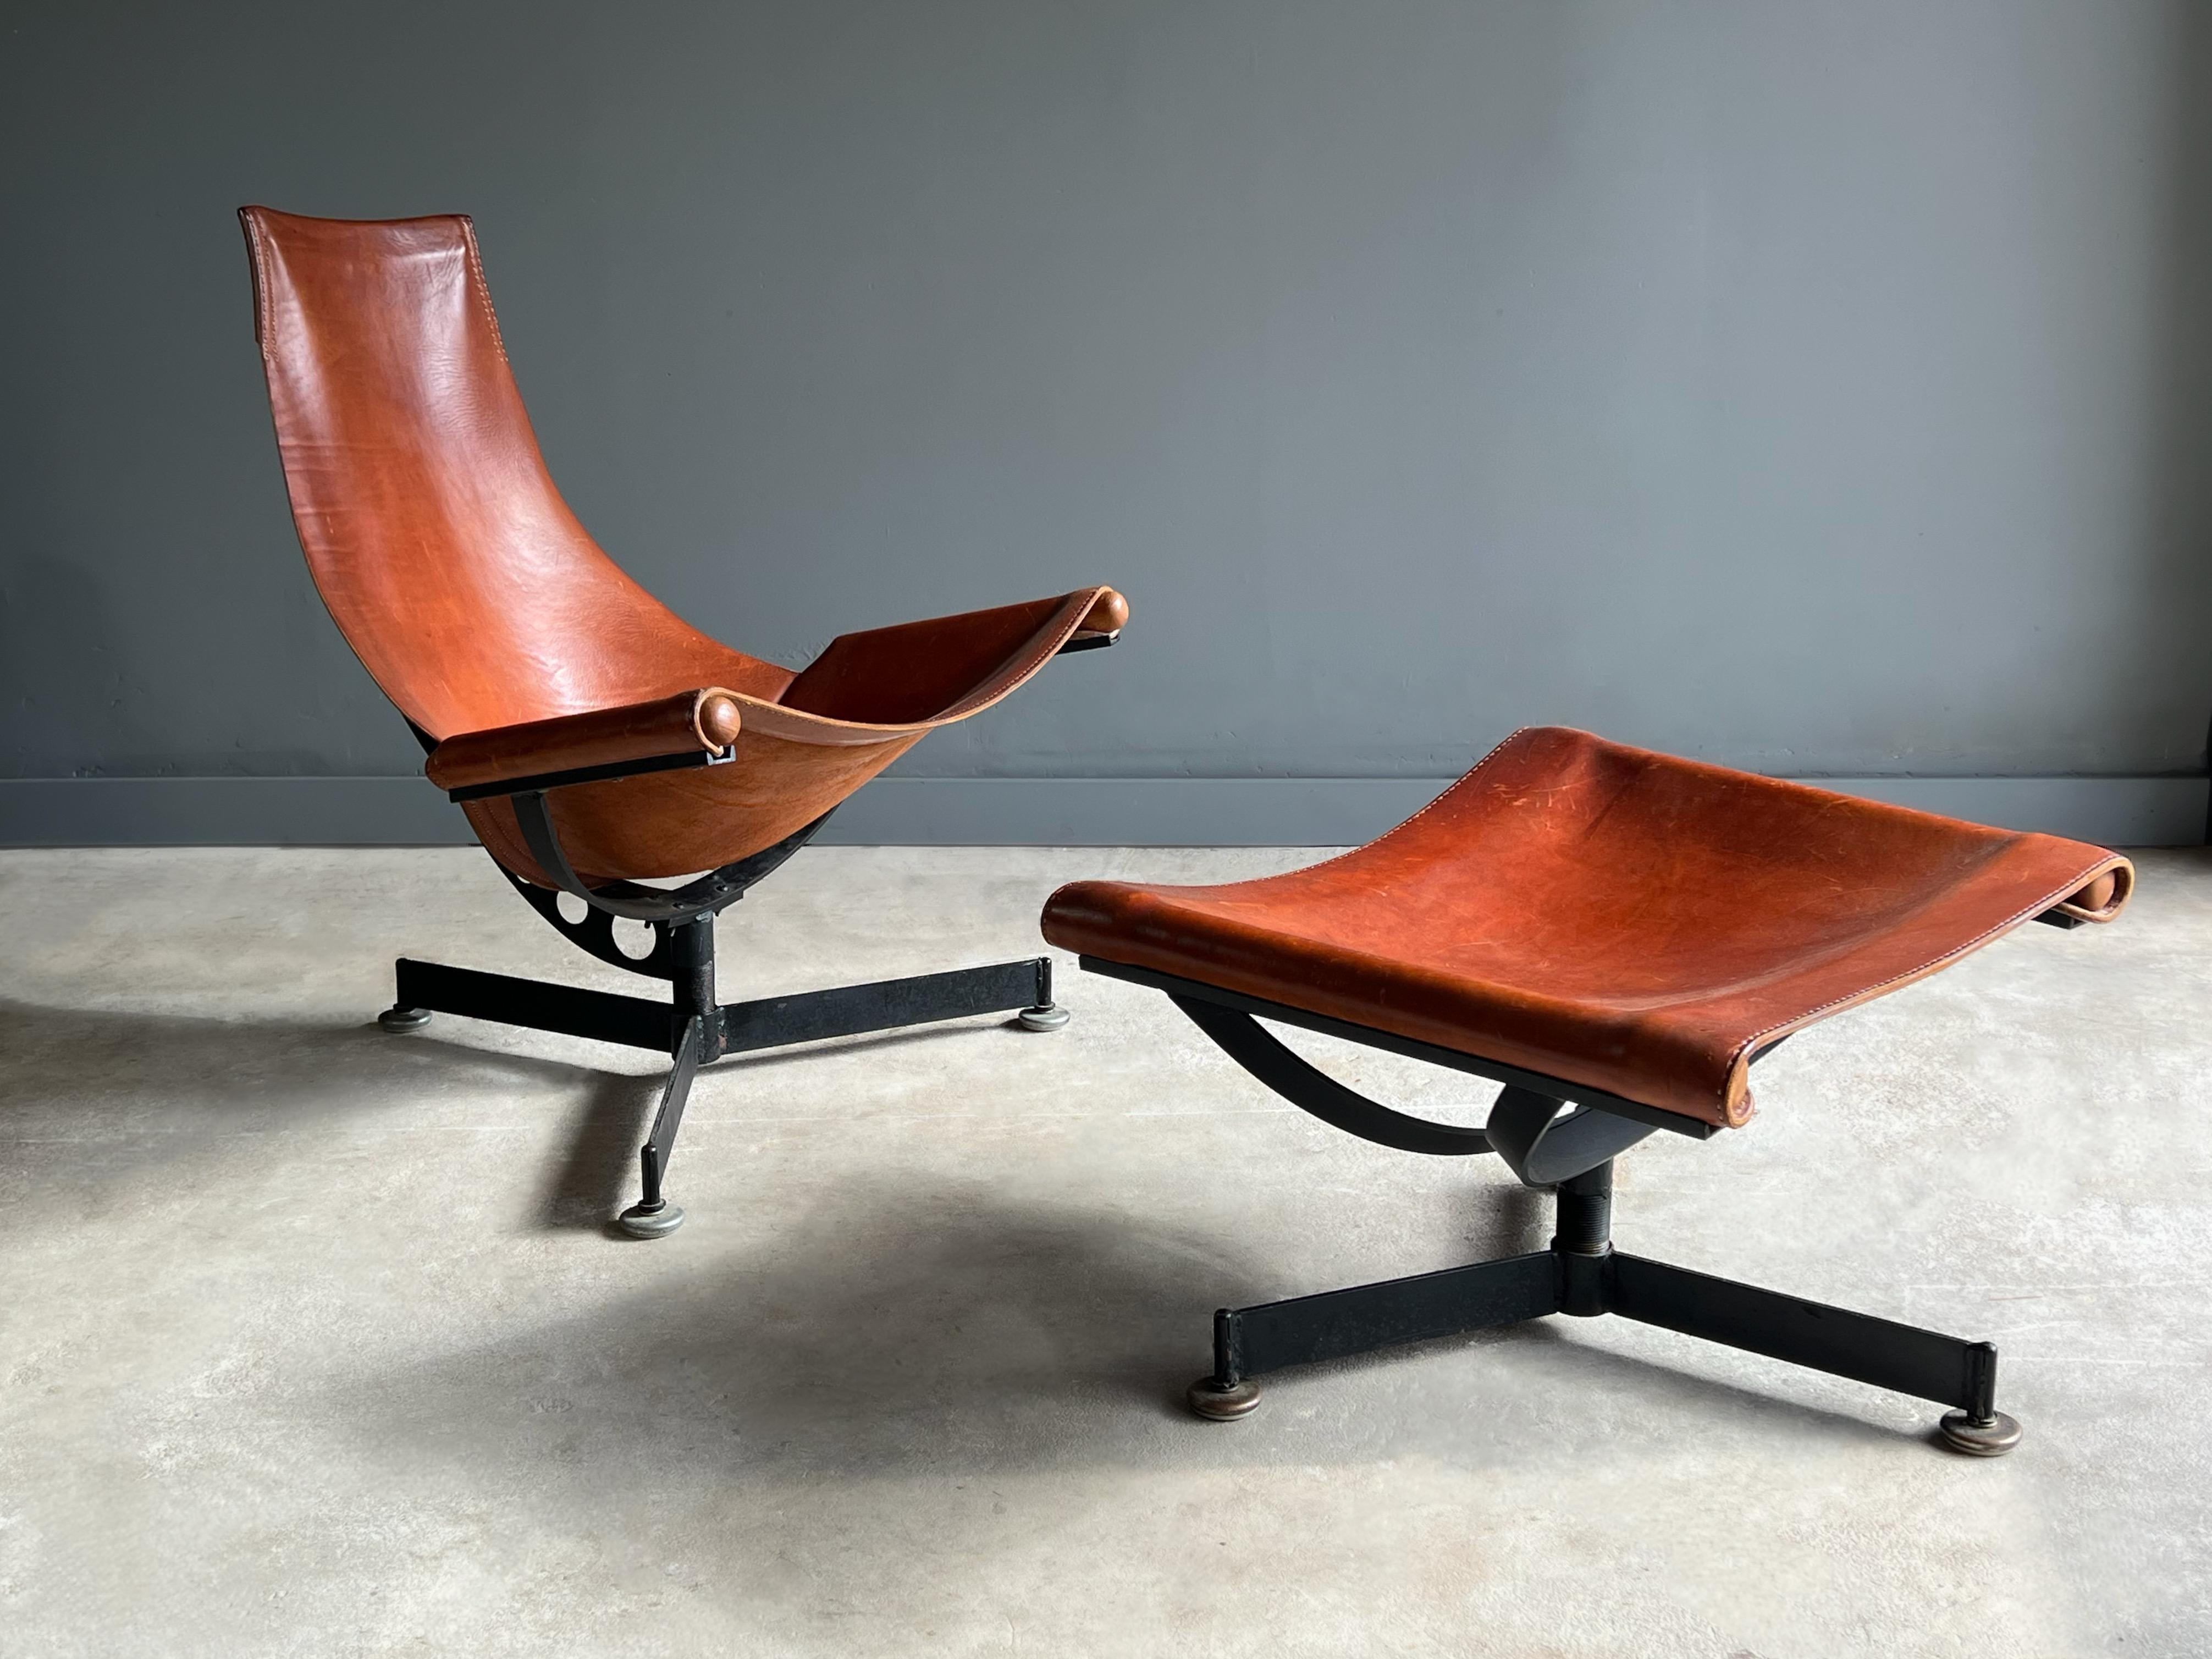 Amazing sculptural sling chair by Arizona industrial designer Max Gottschalk, circa early 1960s. 

This example is about as good as it gets for an early Max Gottschalk sling chair. Constructed of thick saddle leather with a amazing Patina, hand